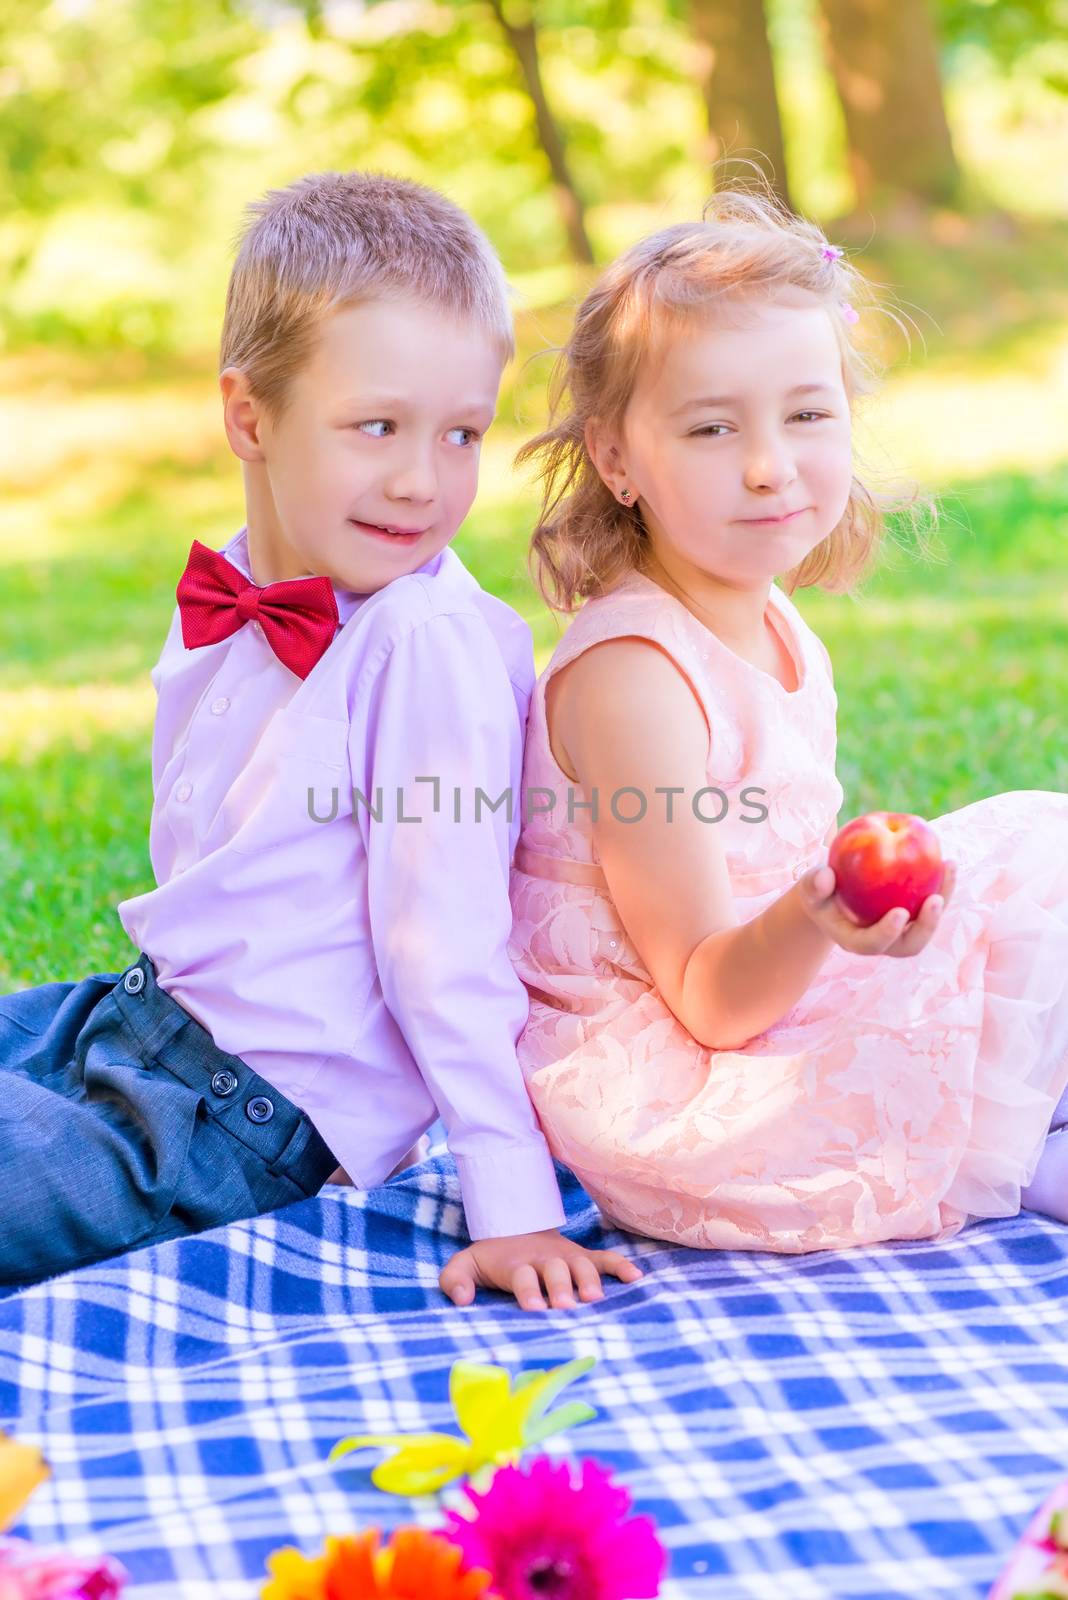 Vertical portrait of a six-year old couple at a picnic in the pa by kosmsos111